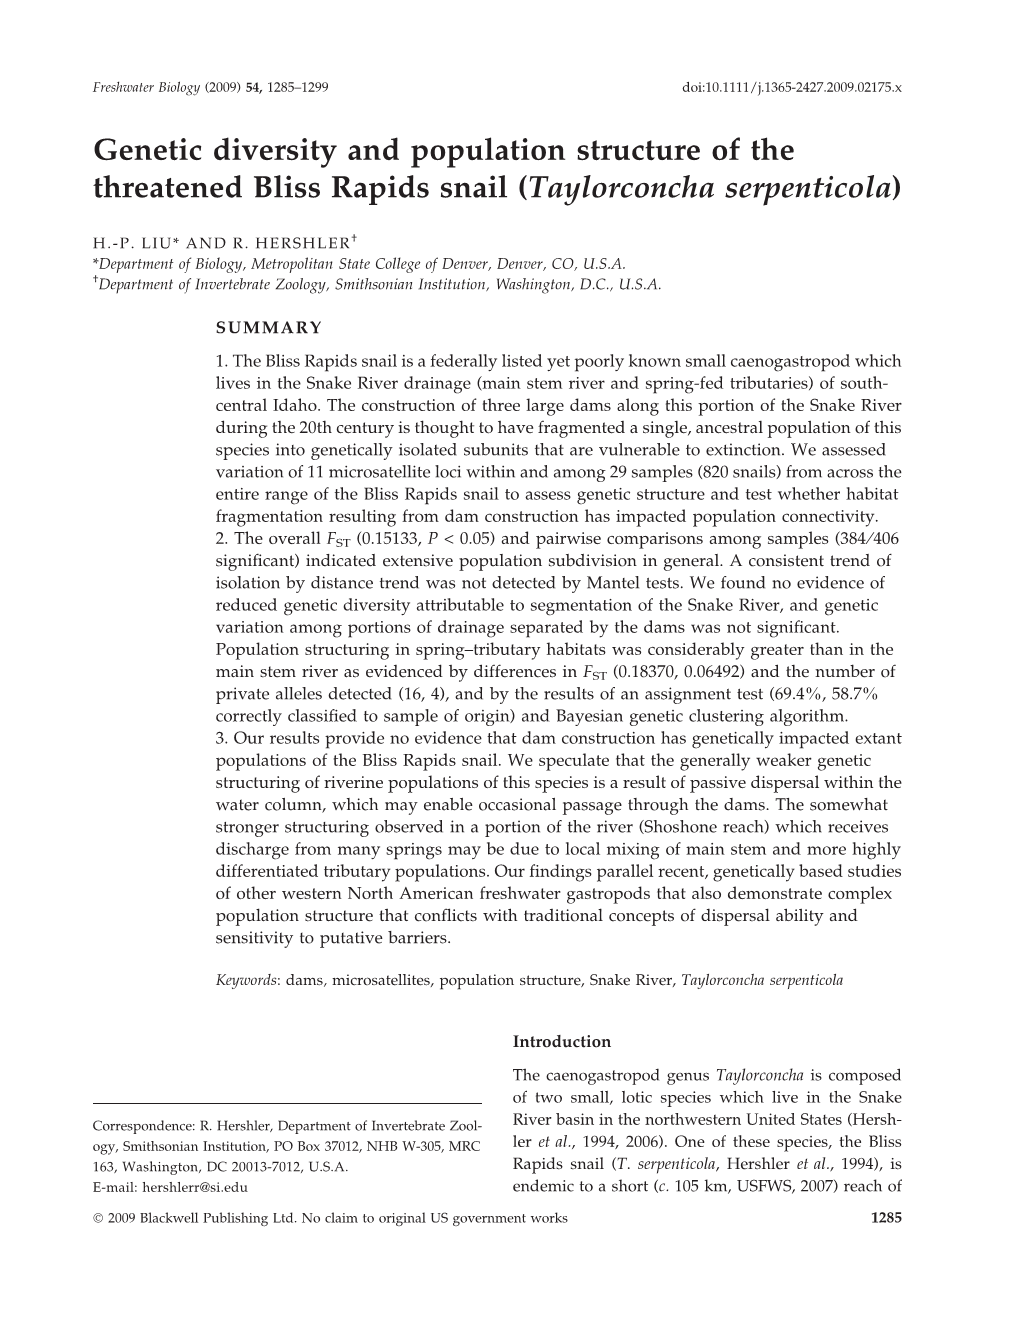 Genetic Diversity and Population Structure of the Threatened Bliss Rapids Snail (Taylorconcha Serpenticola)